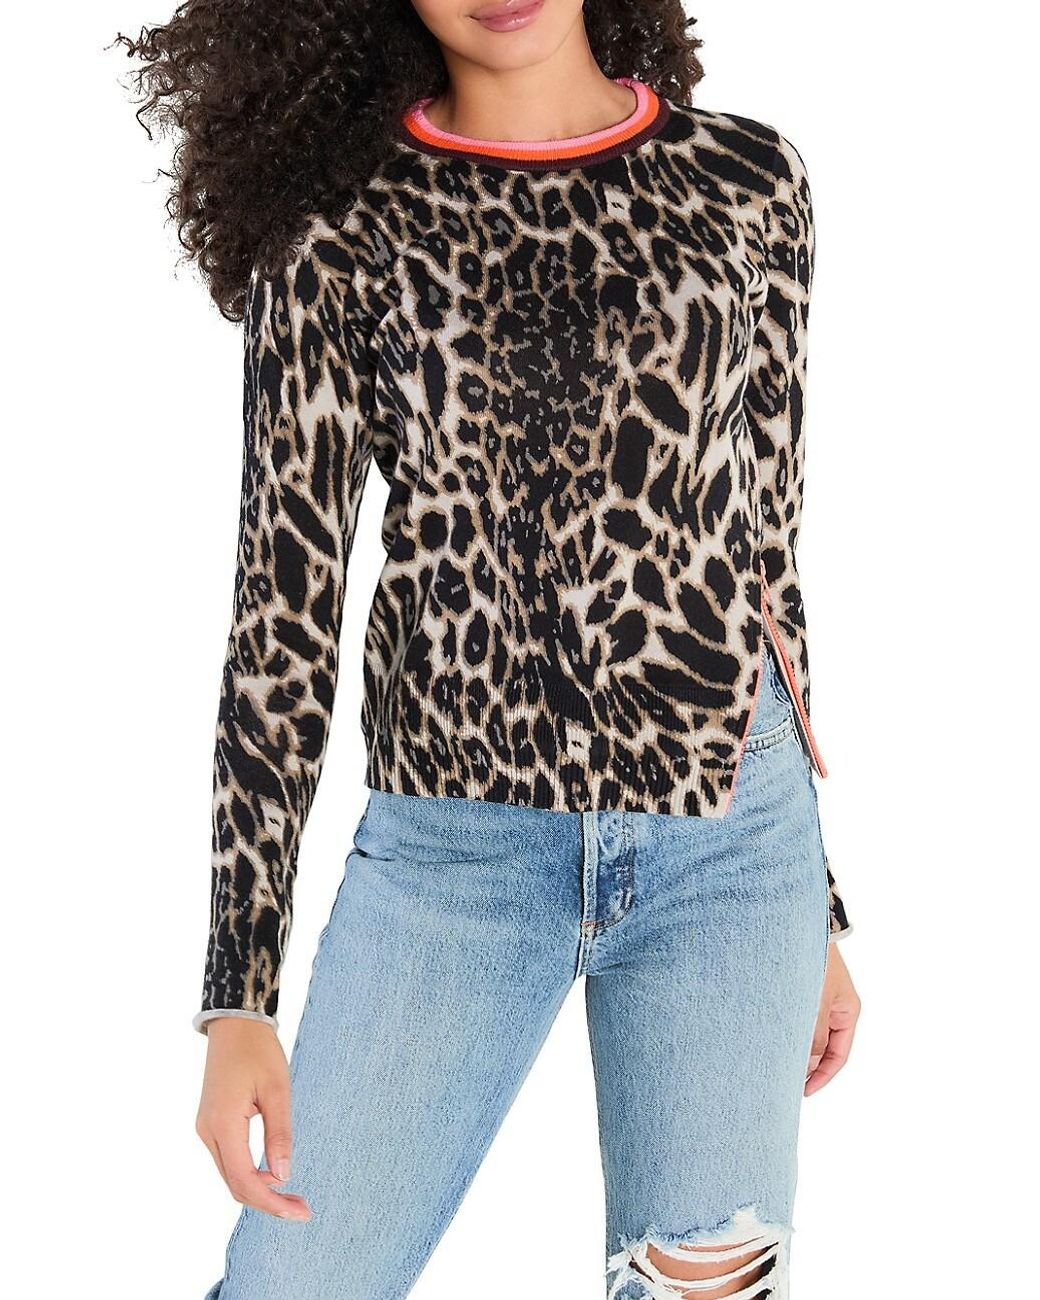 Lisa Todd Animal Instincts Sweater in Black | Lyst